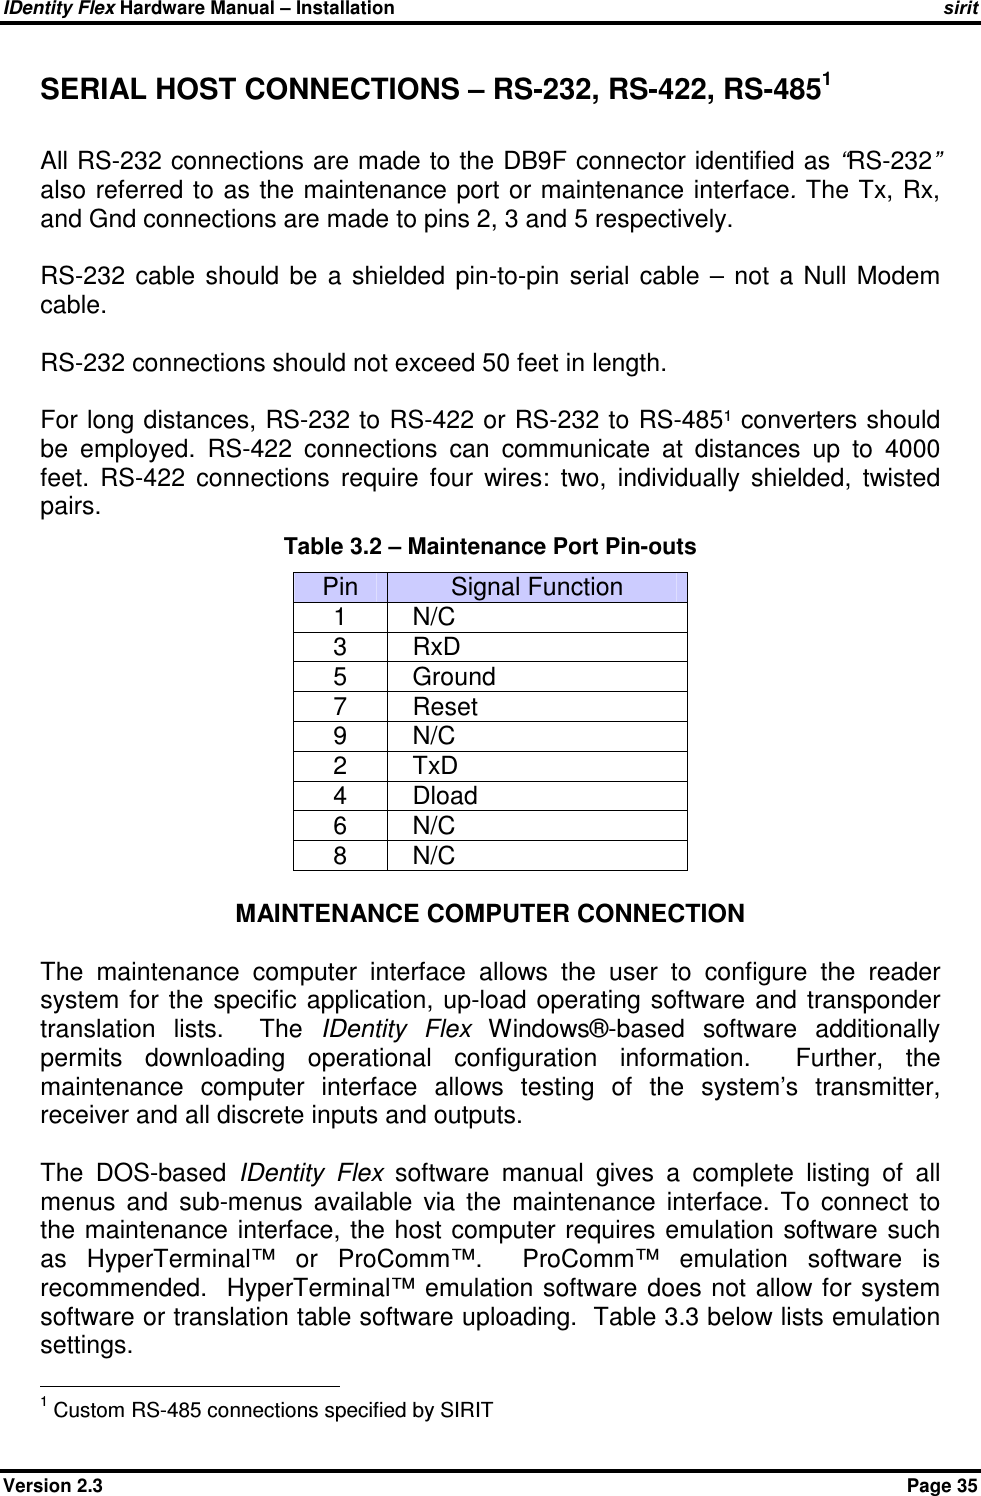 IDentity Flex Hardware Manual – Installation   sirit Version 2.3    Page 35 SERIAL HOST CONNECTIONS – RS-232, RS-422, RS-4851    All RS-232 connections are made to the DB9F connector identified as “RS-232” also referred to as the maintenance port or maintenance interface. The Tx, Rx, and Gnd connections are made to pins 2, 3 and 5 respectively.  RS-232  cable  should  be  a  shielded  pin-to-pin  serial  cable  –  not  a  Null  Modem cable.  RS-232 connections should not exceed 50 feet in length.   For long distances, RS-232 to RS-422 or RS-232 to RS-485¹ converters should be  employed.  RS-422  connections  can  communicate  at  distances  up  to  4000 feet.  RS-422  connections  require  four  wires:  two,  individually  shielded,  twisted pairs. Table 3.2 – Maintenance Port Pin-outs Pin  Signal Function 1    N/C 3    RxD 5    Ground 7    Reset 9    N/C 2    TxD 4    Dload 6    N/C 8    N/C  MAINTENANCE COMPUTER CONNECTION  The  maintenance  computer  interface  allows  the  user  to  configure  the  reader system  for  the specific  application,  up-load operating  software  and transponder translation  lists.    The  IDentity  Flex  Windows®-based  software  additionally permits  downloading  operational  configuration  information.    Further,  the maintenance  computer  interface  allows  testing  of  the  system’s  transmitter, receiver and all discrete inputs and outputs.   The  DOS-based  IDentity  Flex  software  manual  gives  a  complete  listing  of  all menus  and  sub-menus  available  via  the  maintenance  interface.  To  connect  to the maintenance  interface,  the host computer  requires emulation software  such as  HyperTerminal™  or  ProComm™.    ProComm™  emulation  software  is recommended.   HyperTerminal™ emulation  software does not  allow for  system software or translation table software uploading.  Table 3.3 below lists emulation settings.                                             1 Custom RS-485 connections specified by SIRIT 